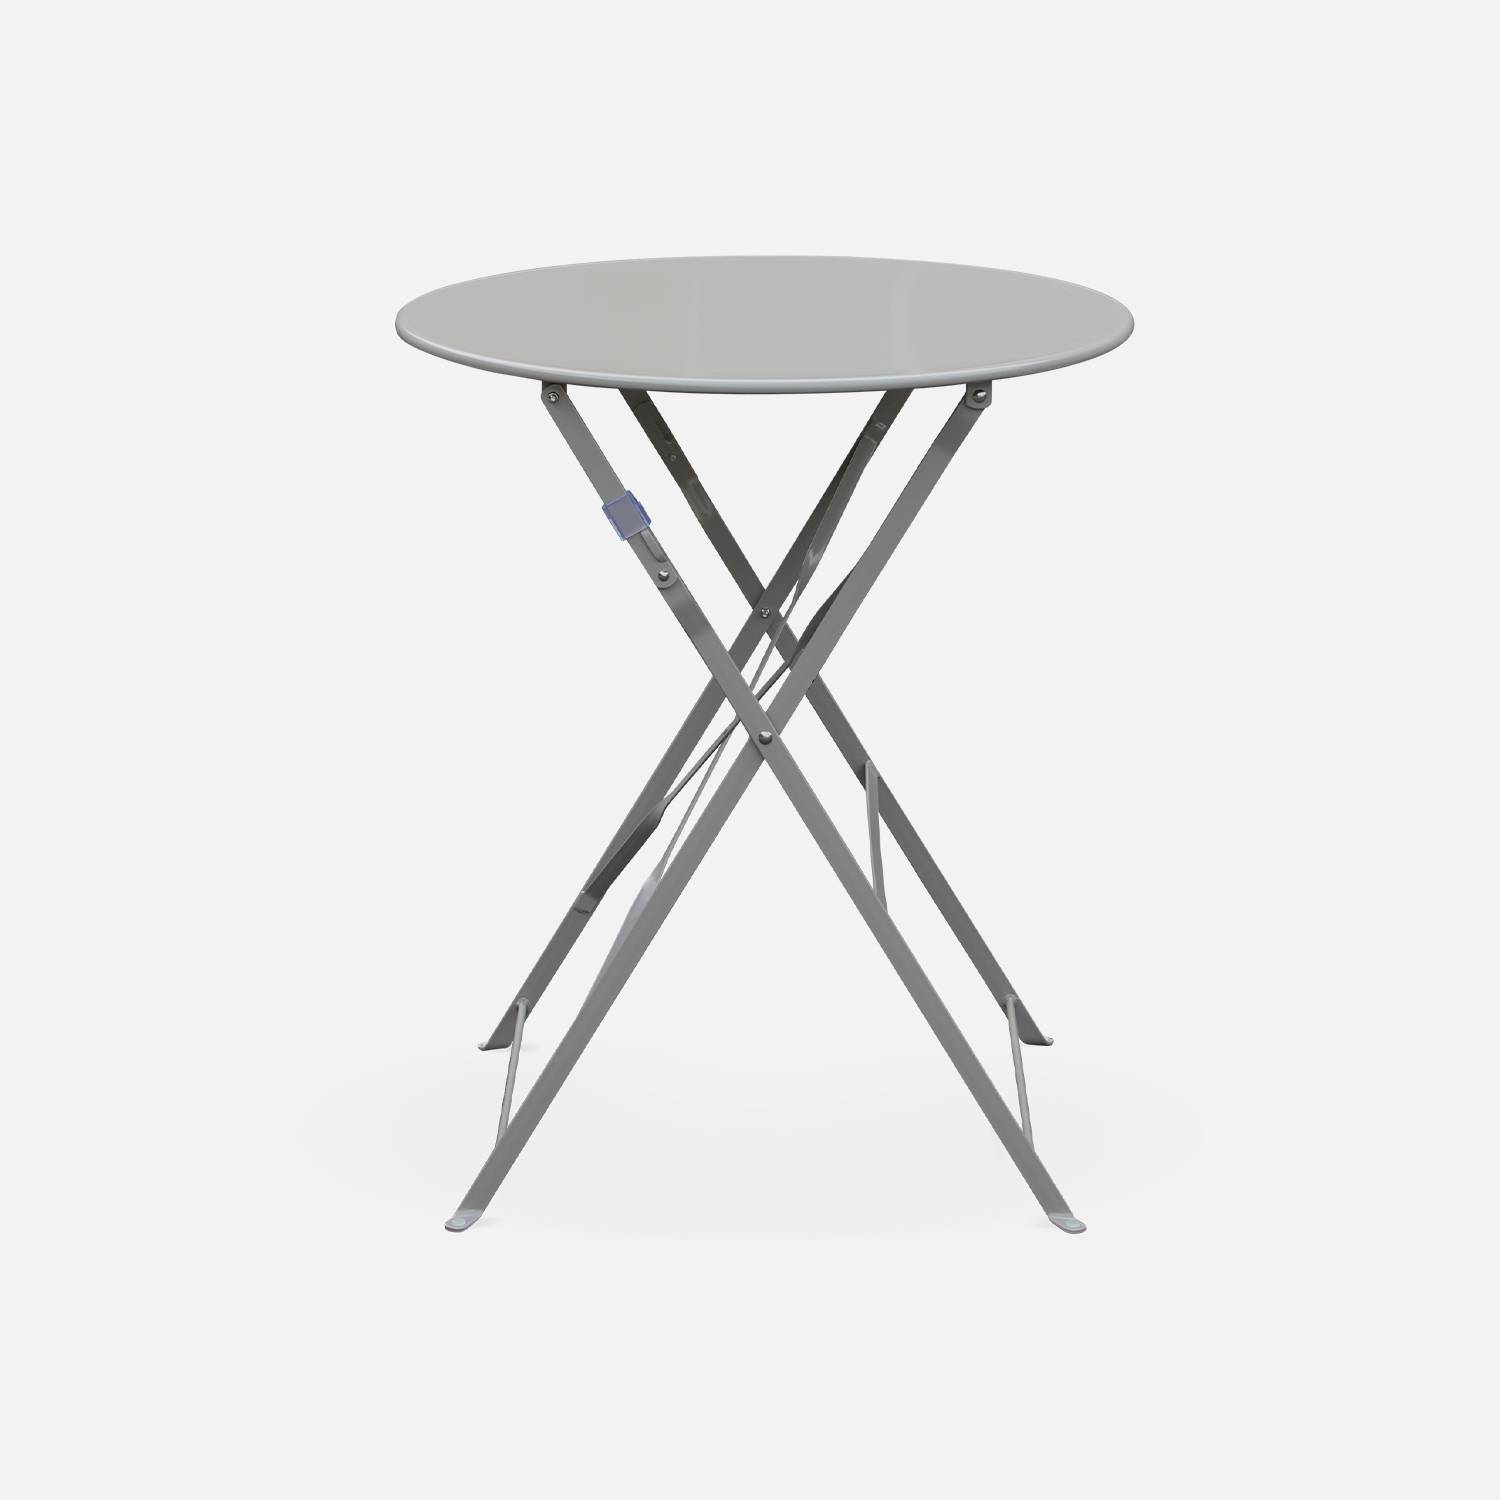 2-seater foldable thermo-lacquered steel bistro garden table with chairs, Ø60cm - Emilia - Taupe grey,sweeek,Photo3